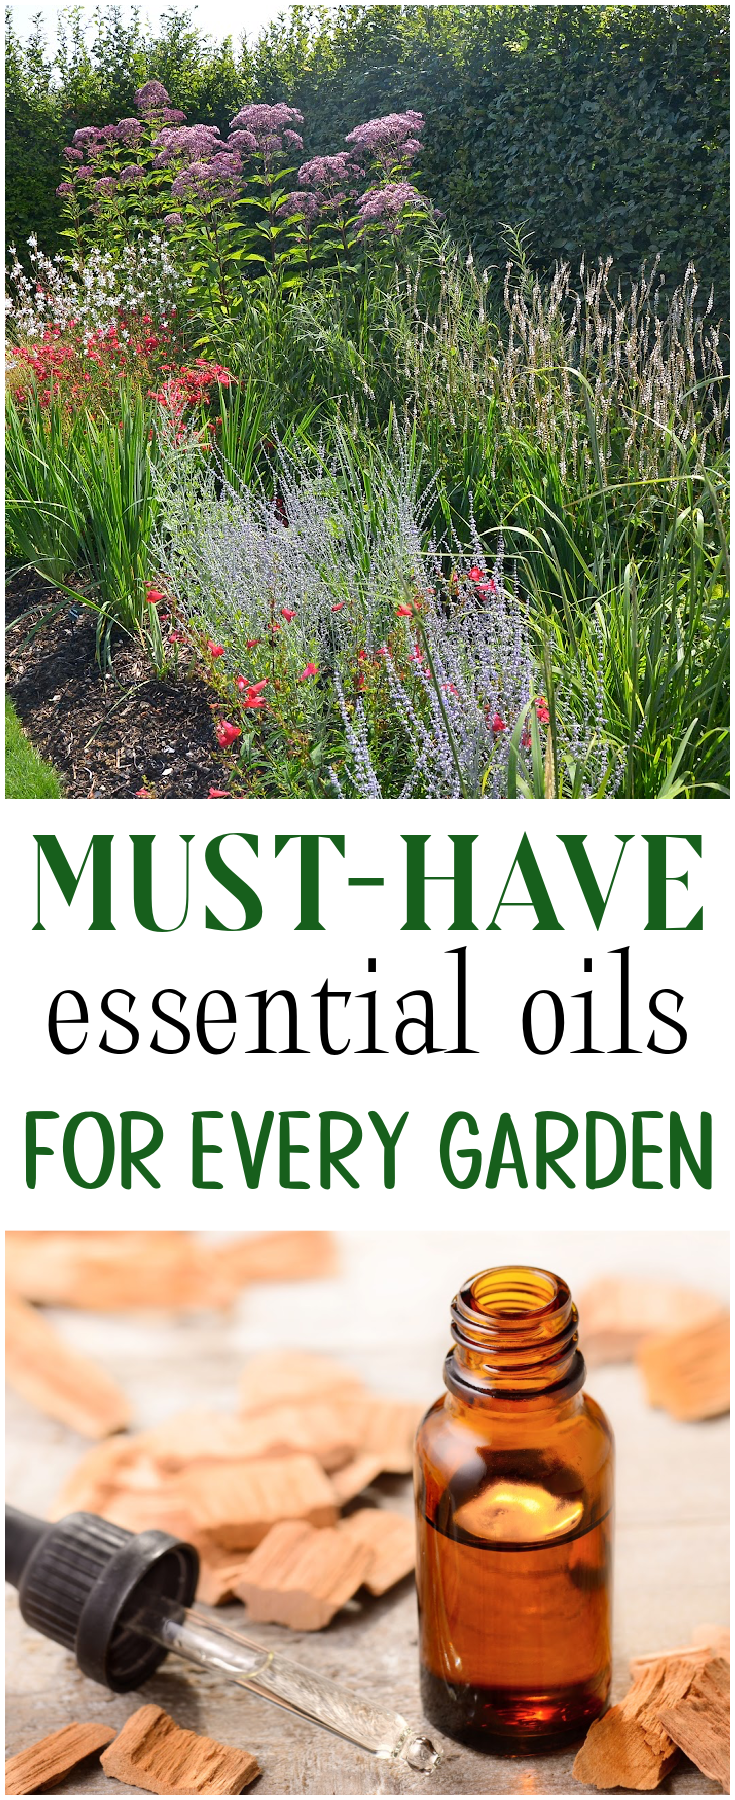 Love time in the garden? Find out the MUST-have essential oils that every gardener needs!